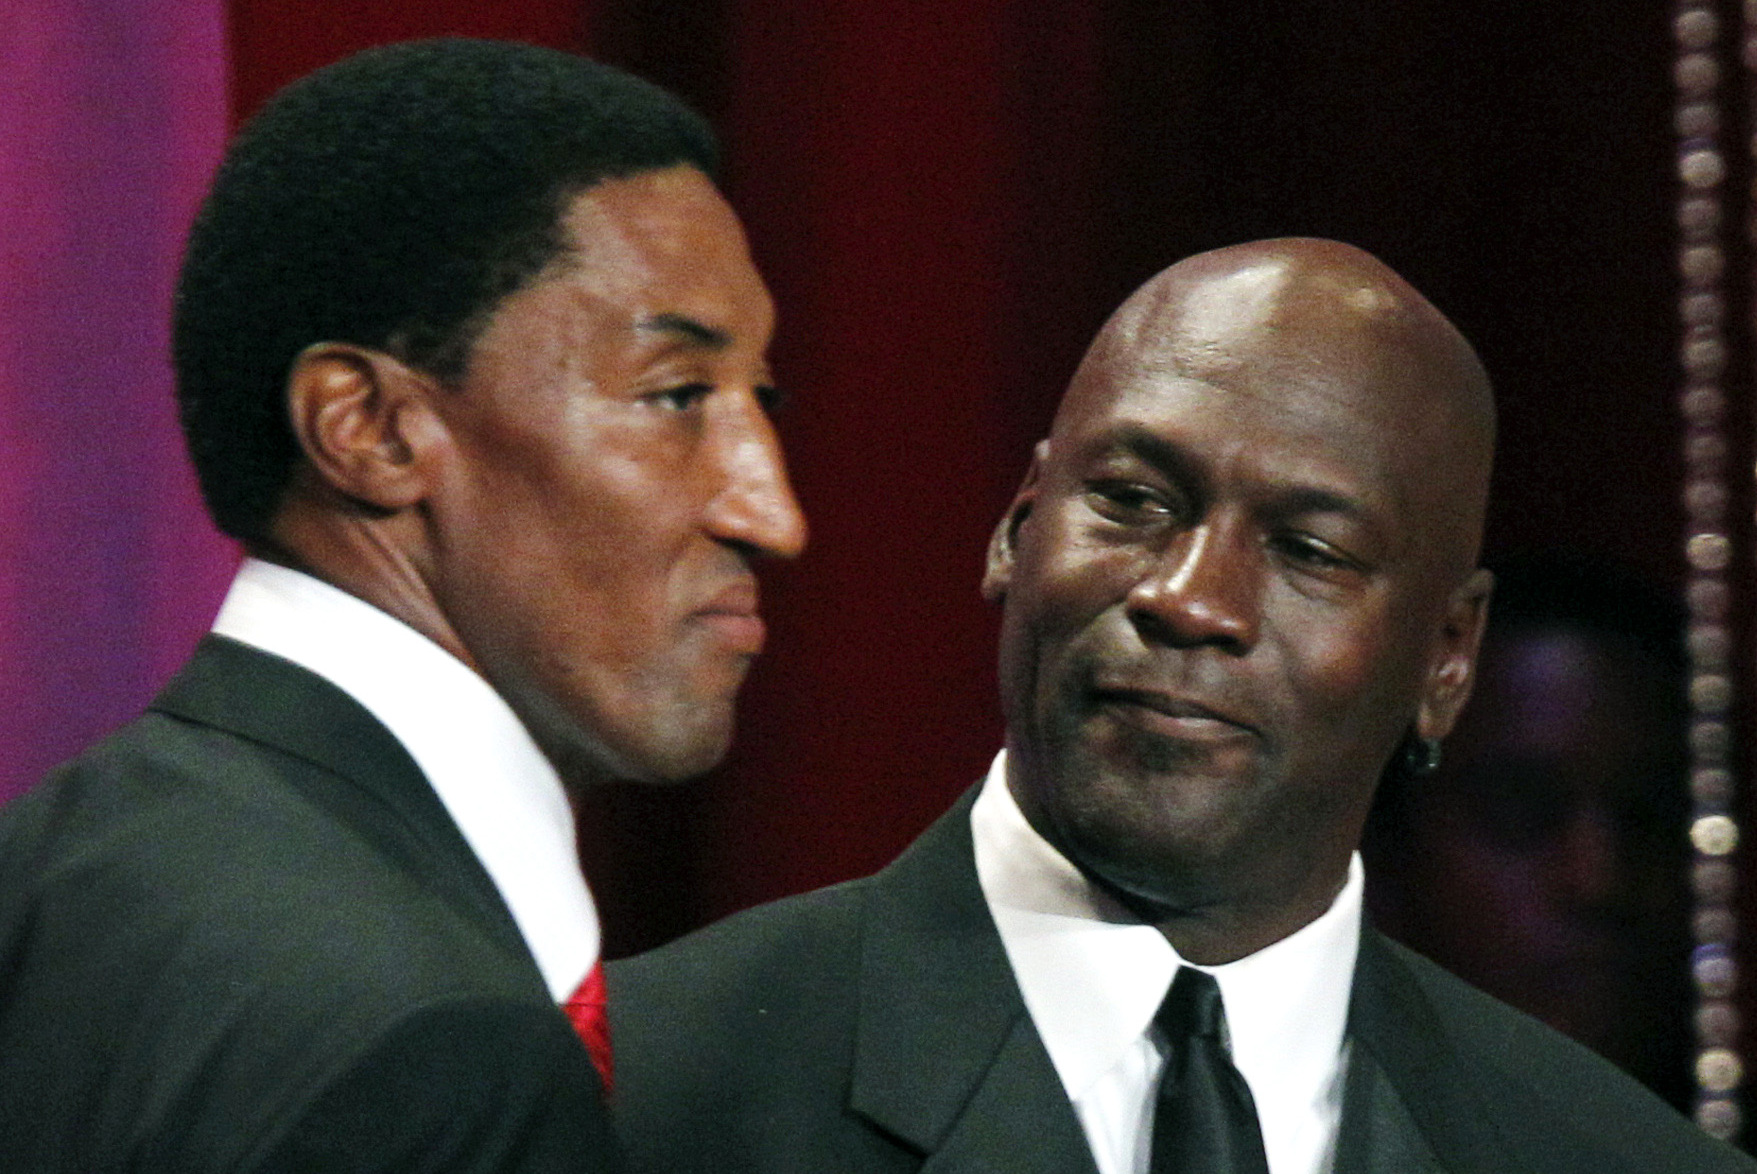 græs hver for sig job Report: Scottie Pippen 'So Angry' at Michael Jordan over 'Last Dance'  Portrayal | Bleacher Report | Latest News, Videos and Highlights